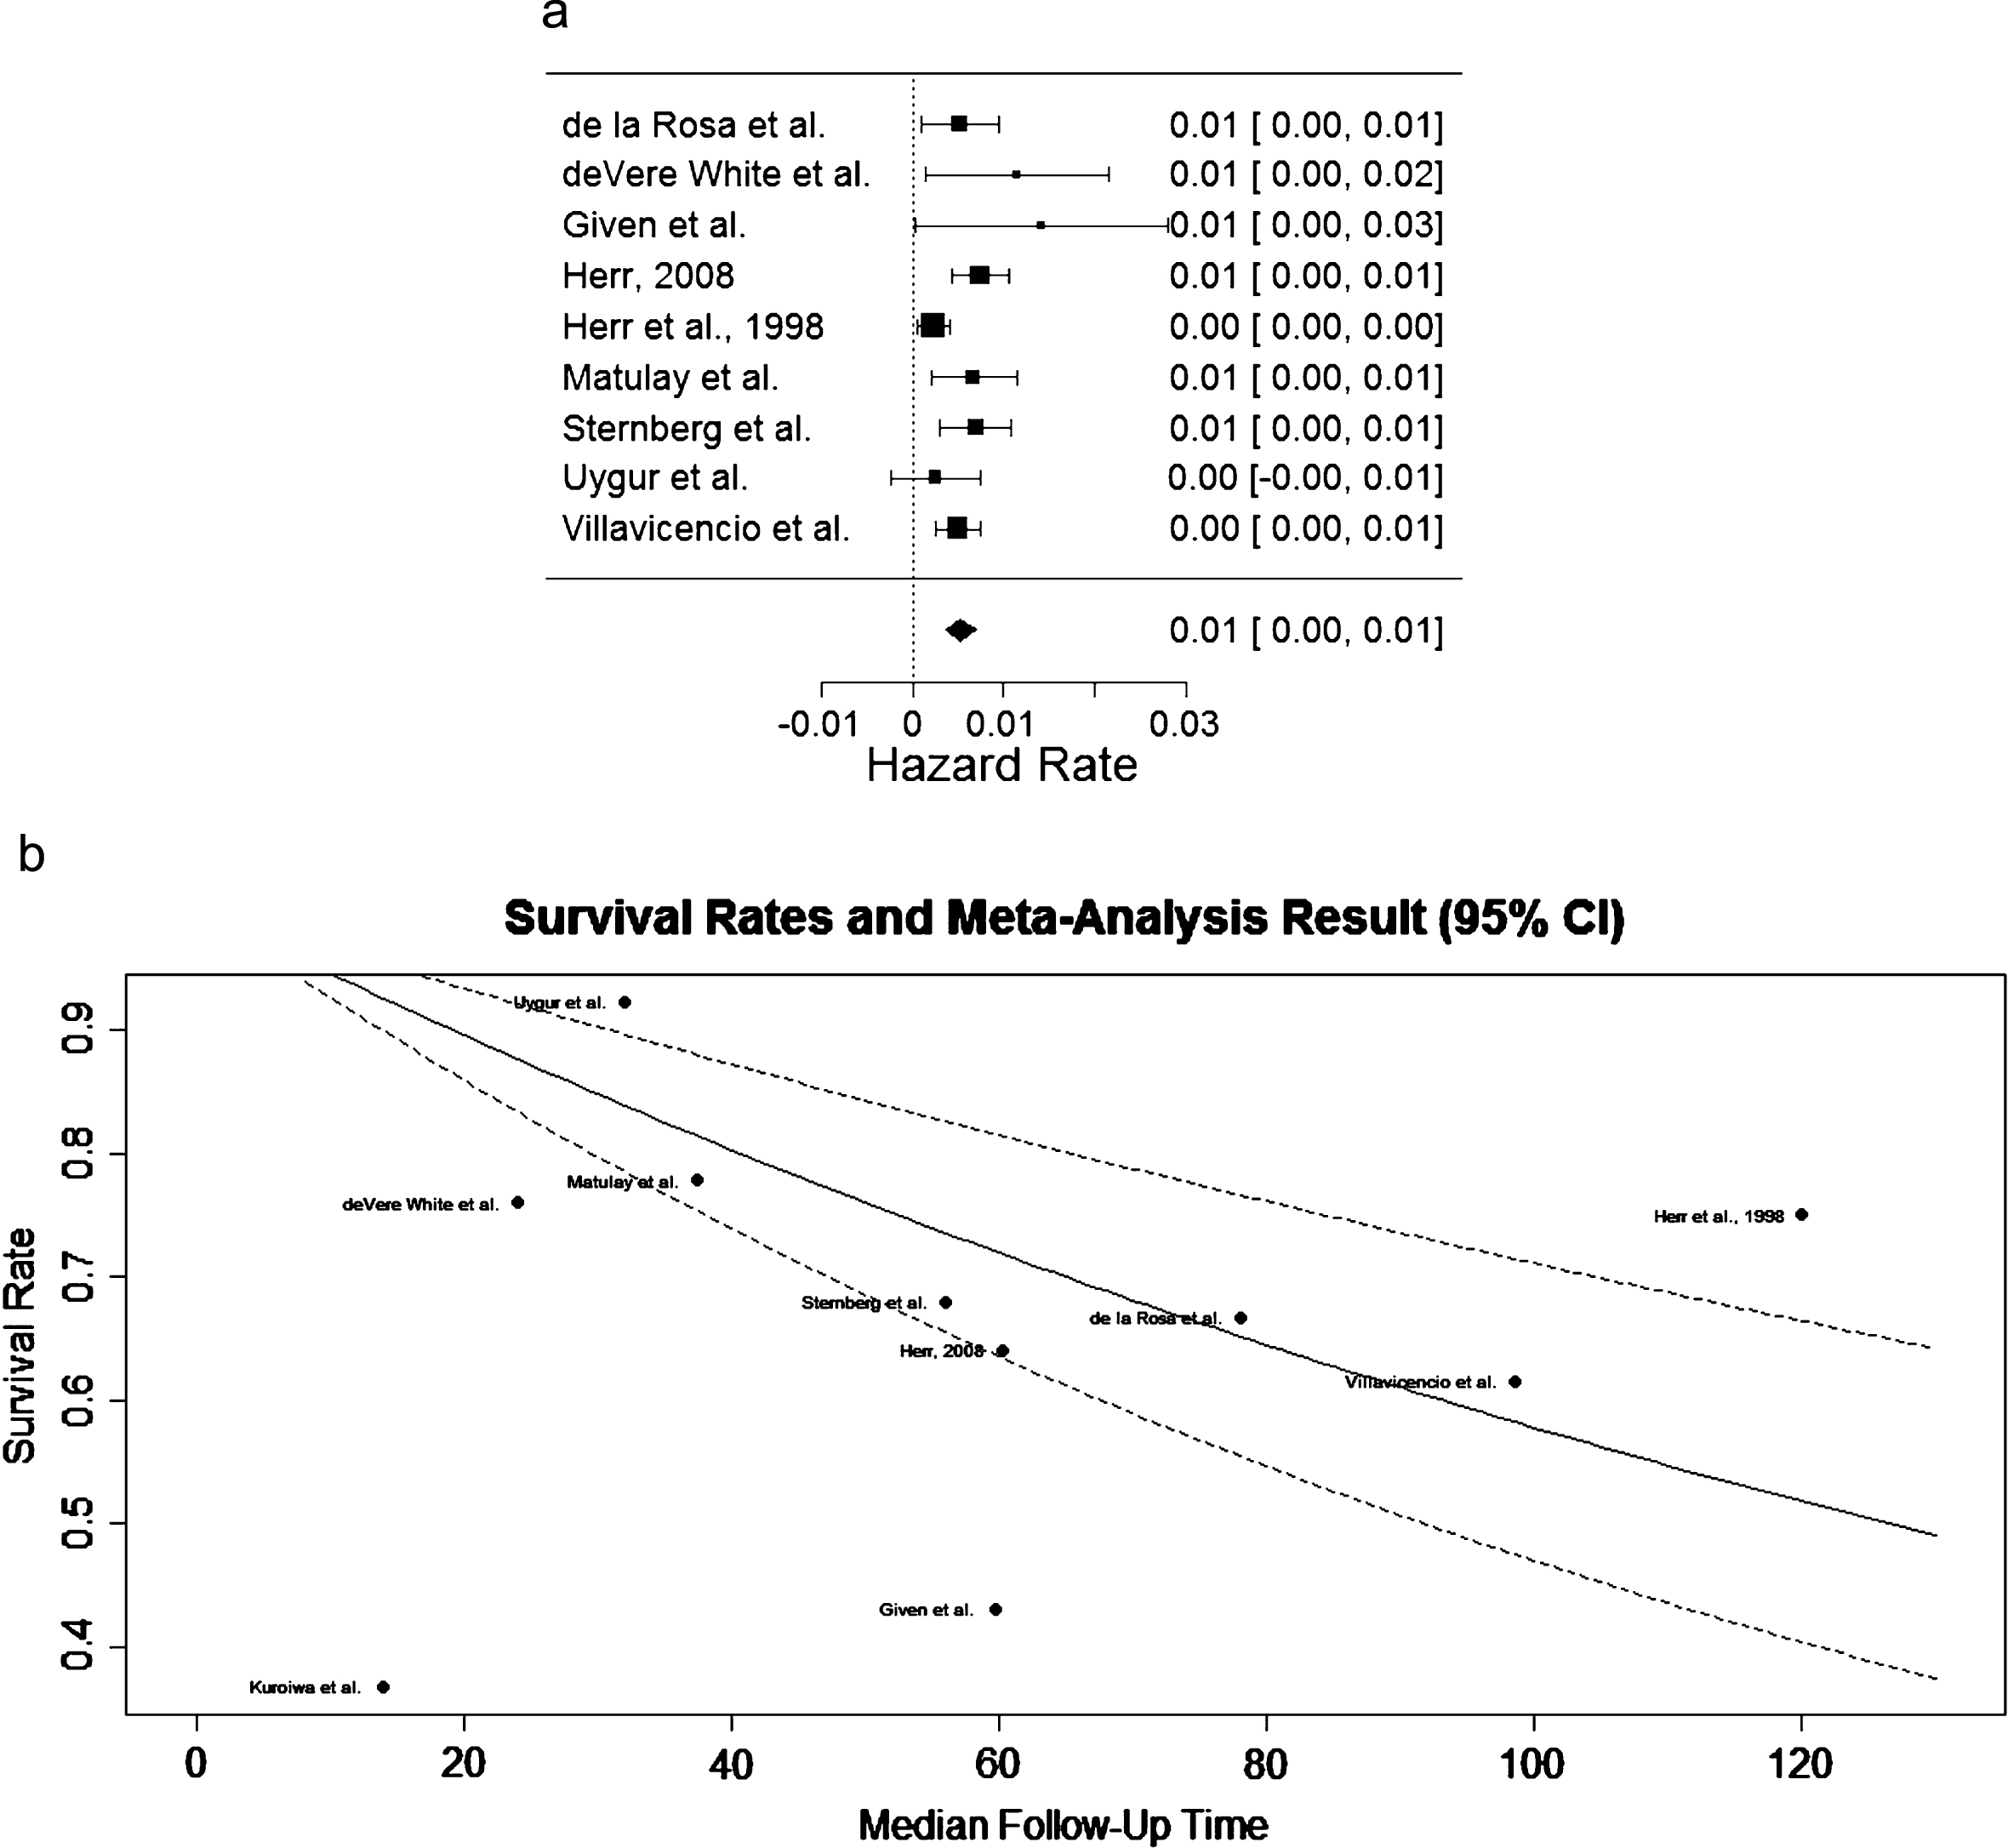 (a) Forest plot depicting hazard rates, signifying rate of death, in studies included in the meta-analysis. (b) Estimated Kaplan-Meier curve overlay on the survival rates from each study included in the meta-analysis.